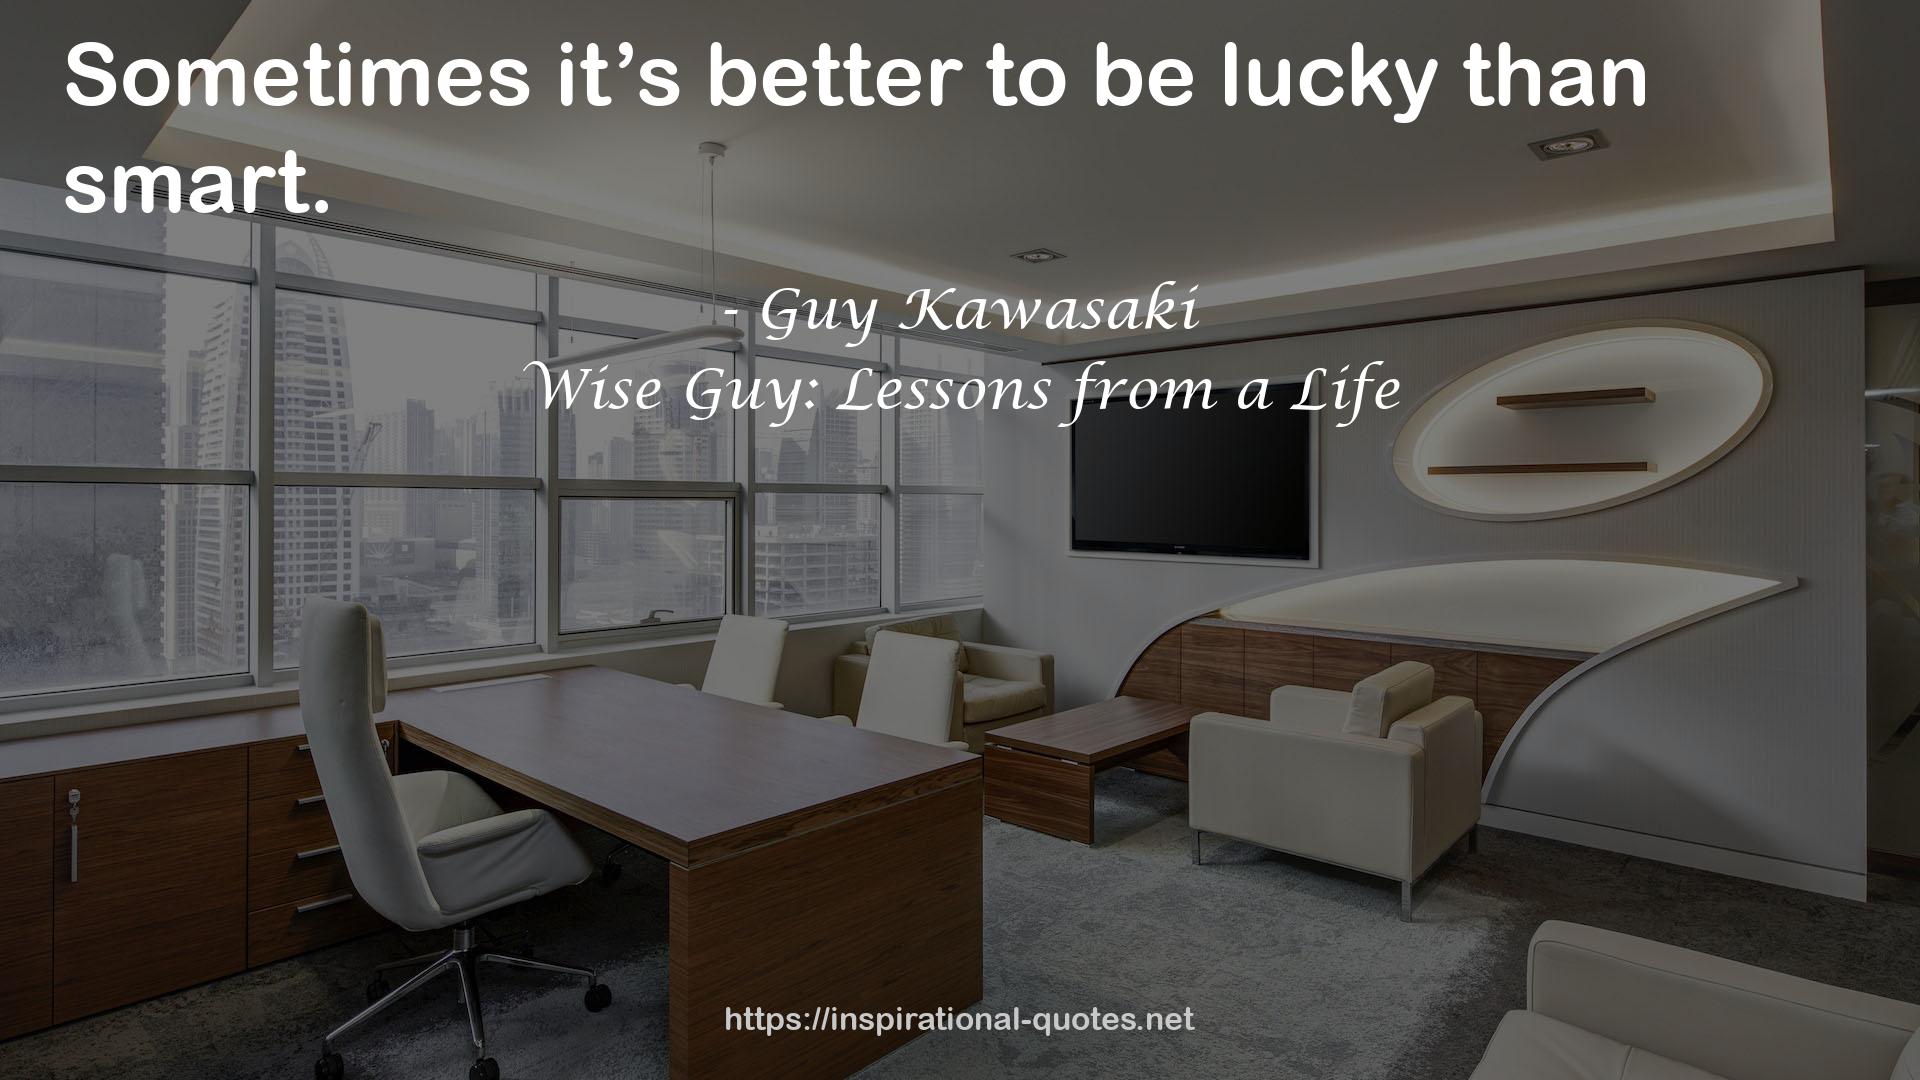 Wise Guy: Lessons from a Life QUOTES